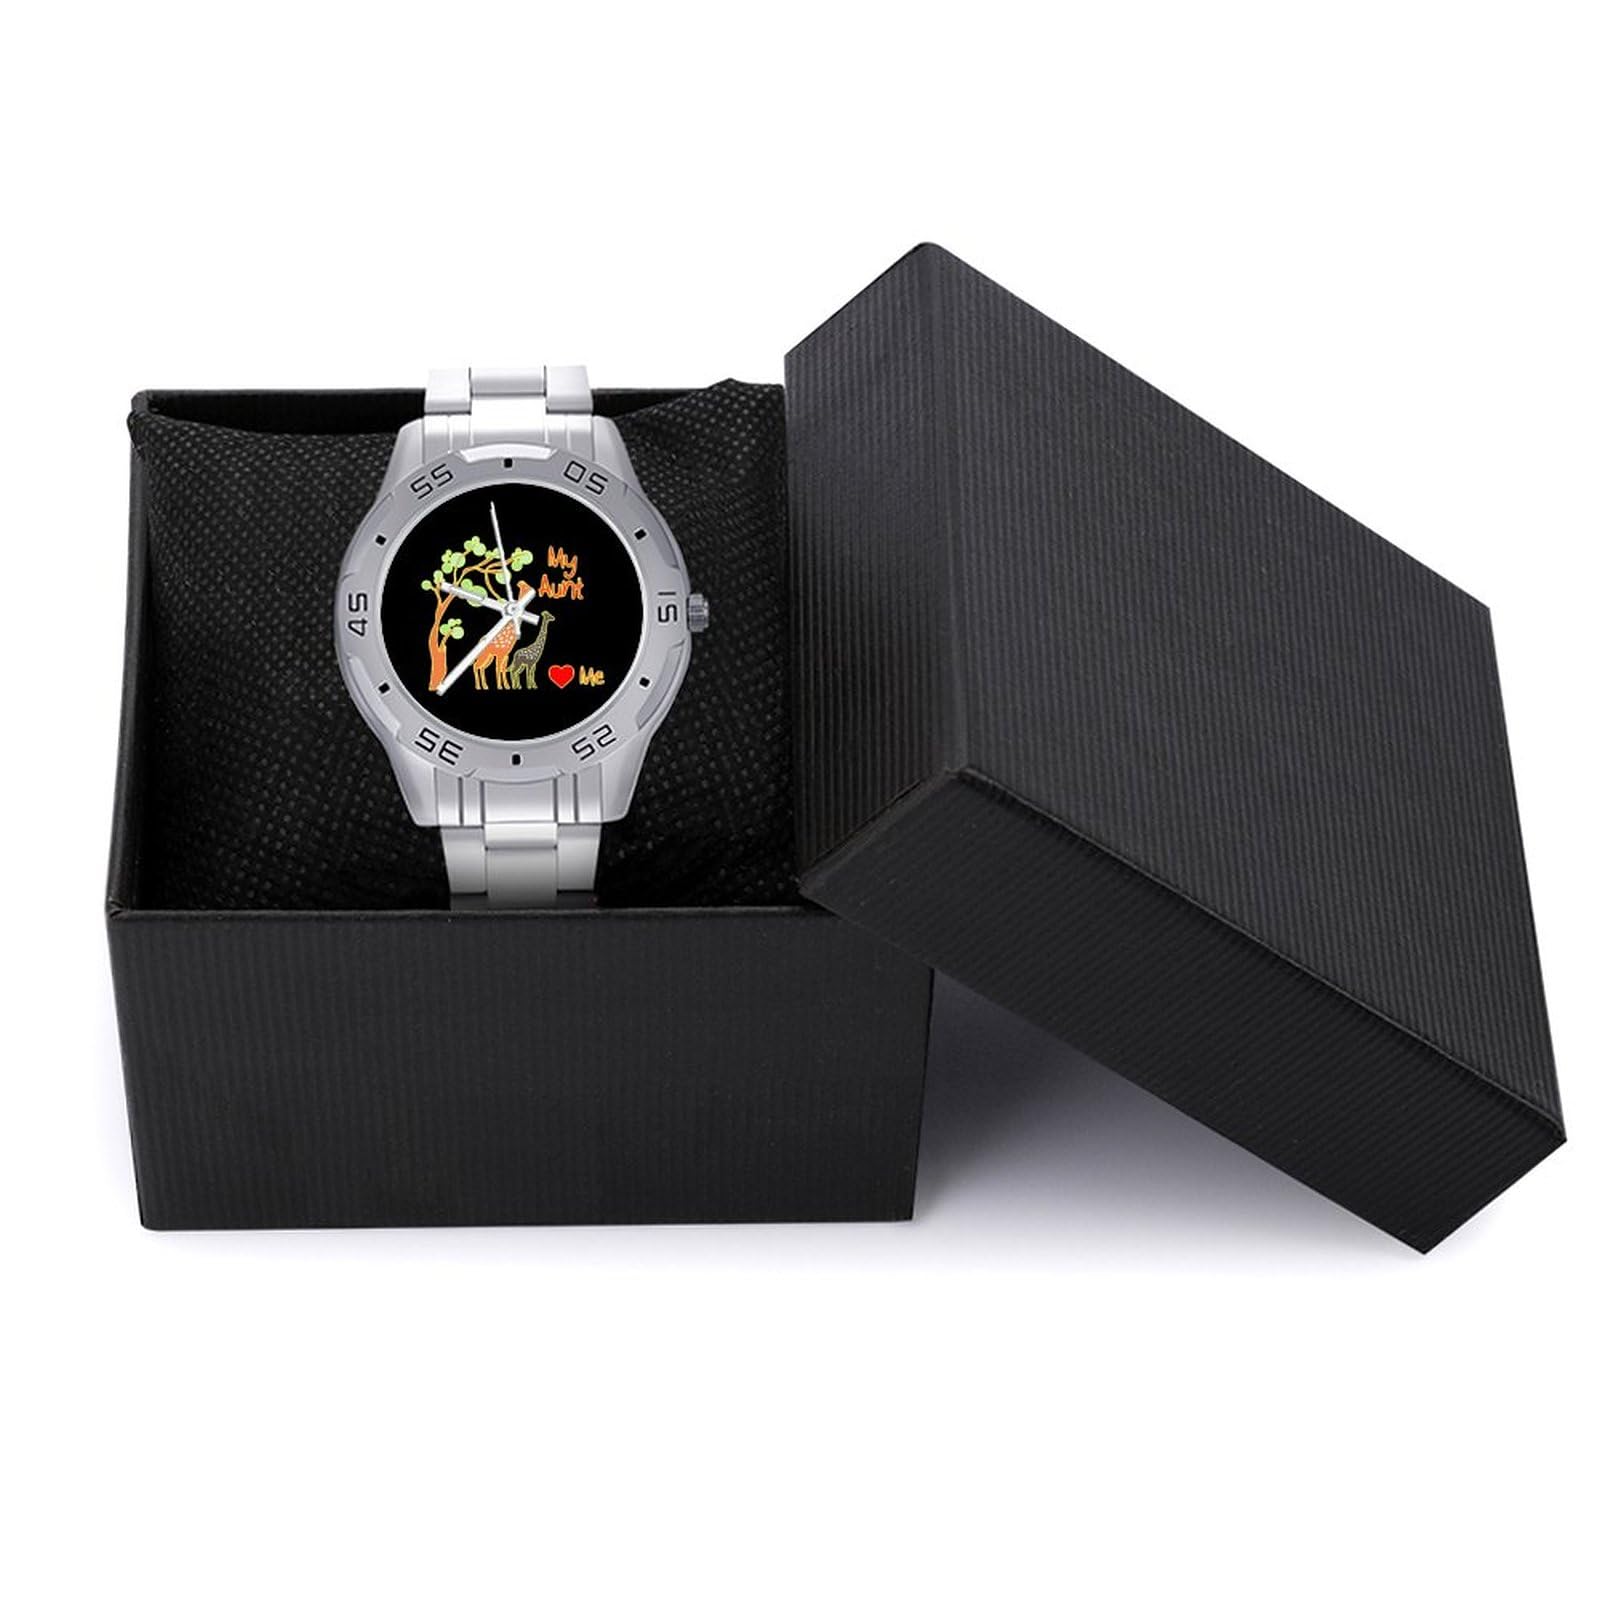 My Aunt Loves Me Stainless Steel Band Business Watch Dress Wrist Unique Luxury Work Casual Waterproof Watches